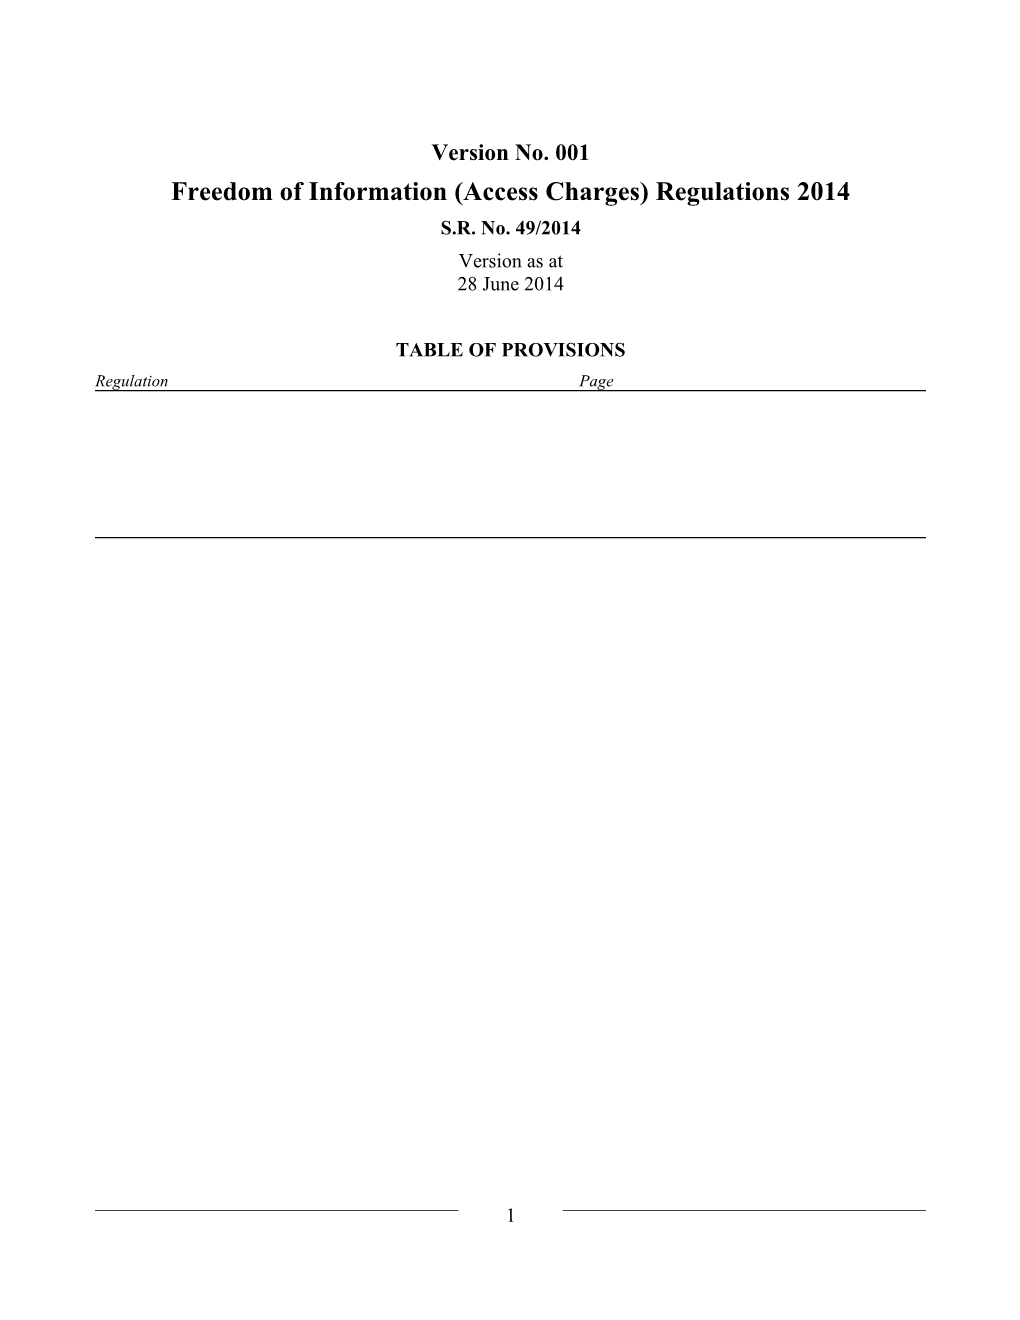 Freedom of Information (Access Charges) Regulations 2014